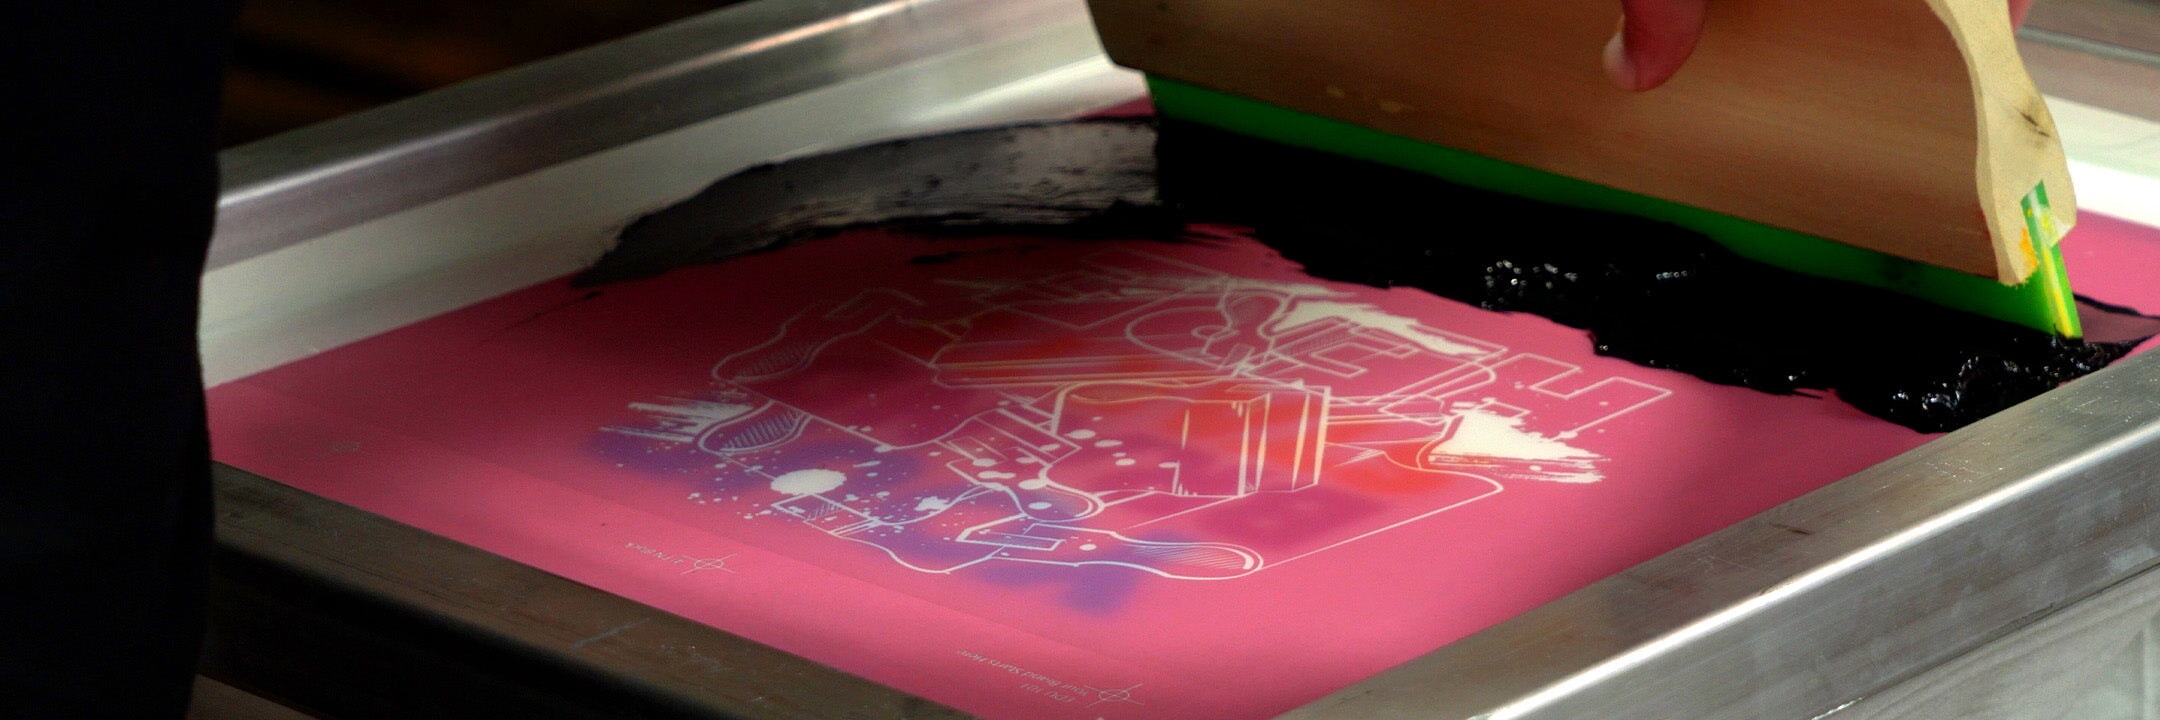 Screen Printing How To: Finding The Cure.